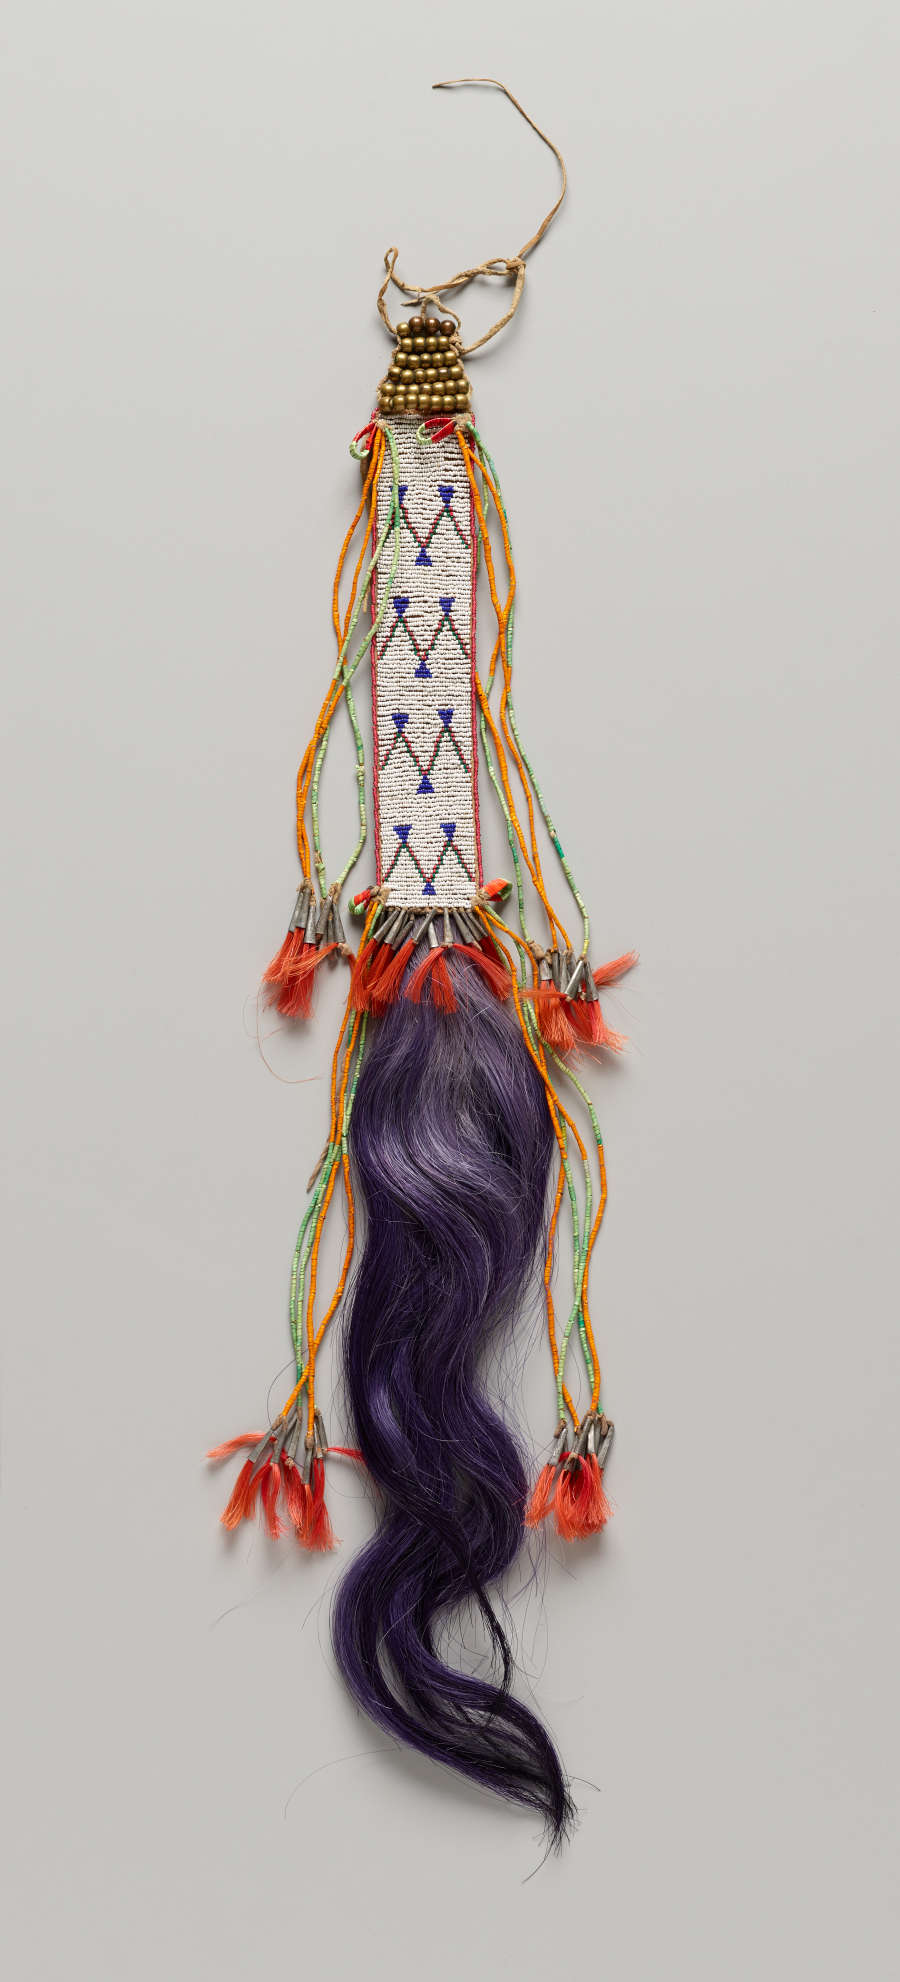 Long vertically beaded rectangle with bright colorful tassels and long wavy purplish hair coming from the bottom. The tassels are orange and connect to green, red, and yellow threads.